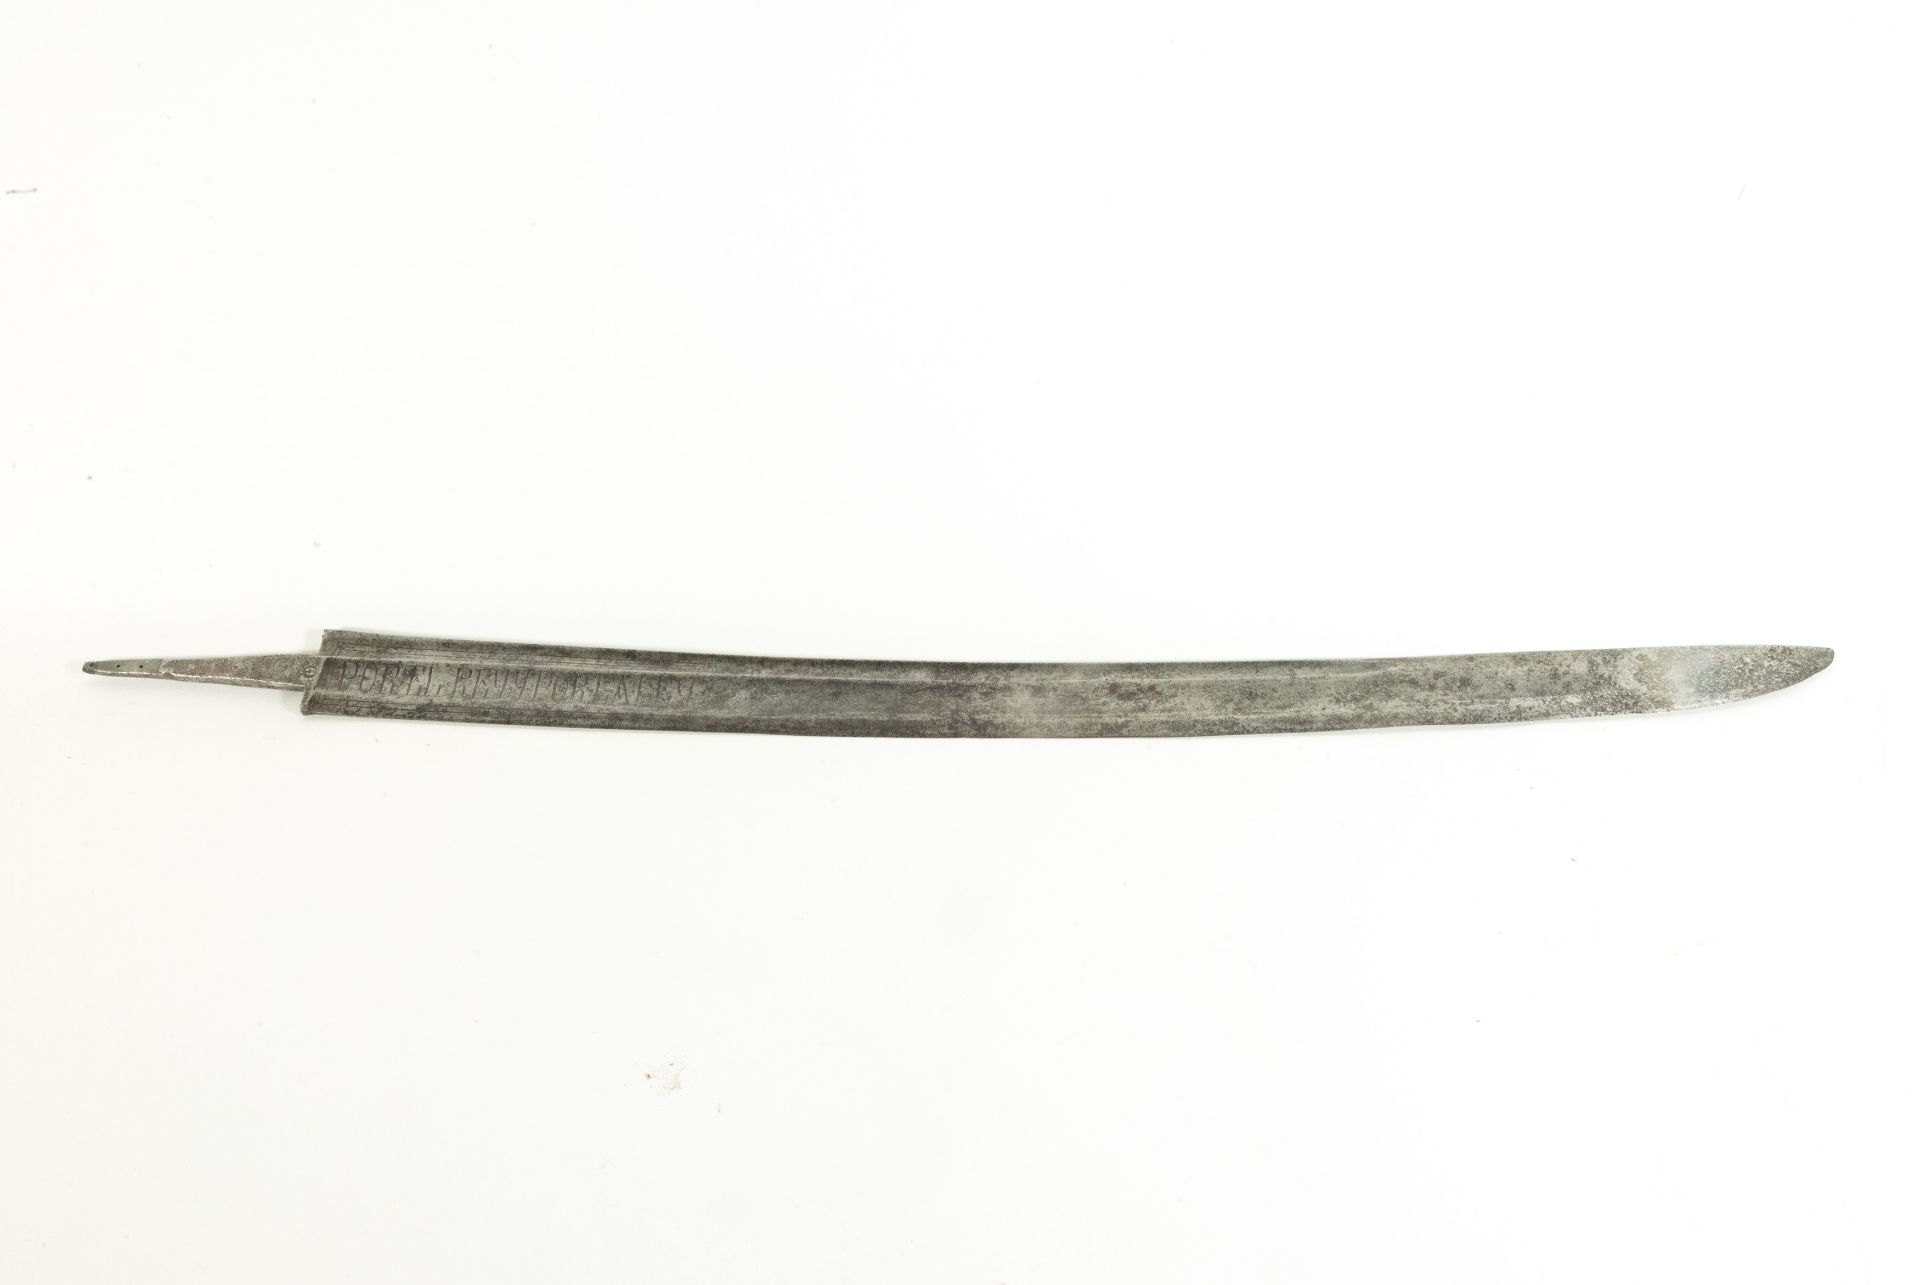 Saber from the Spanish War of Independence, Ferdinand VII, with inscription "For the King and For th